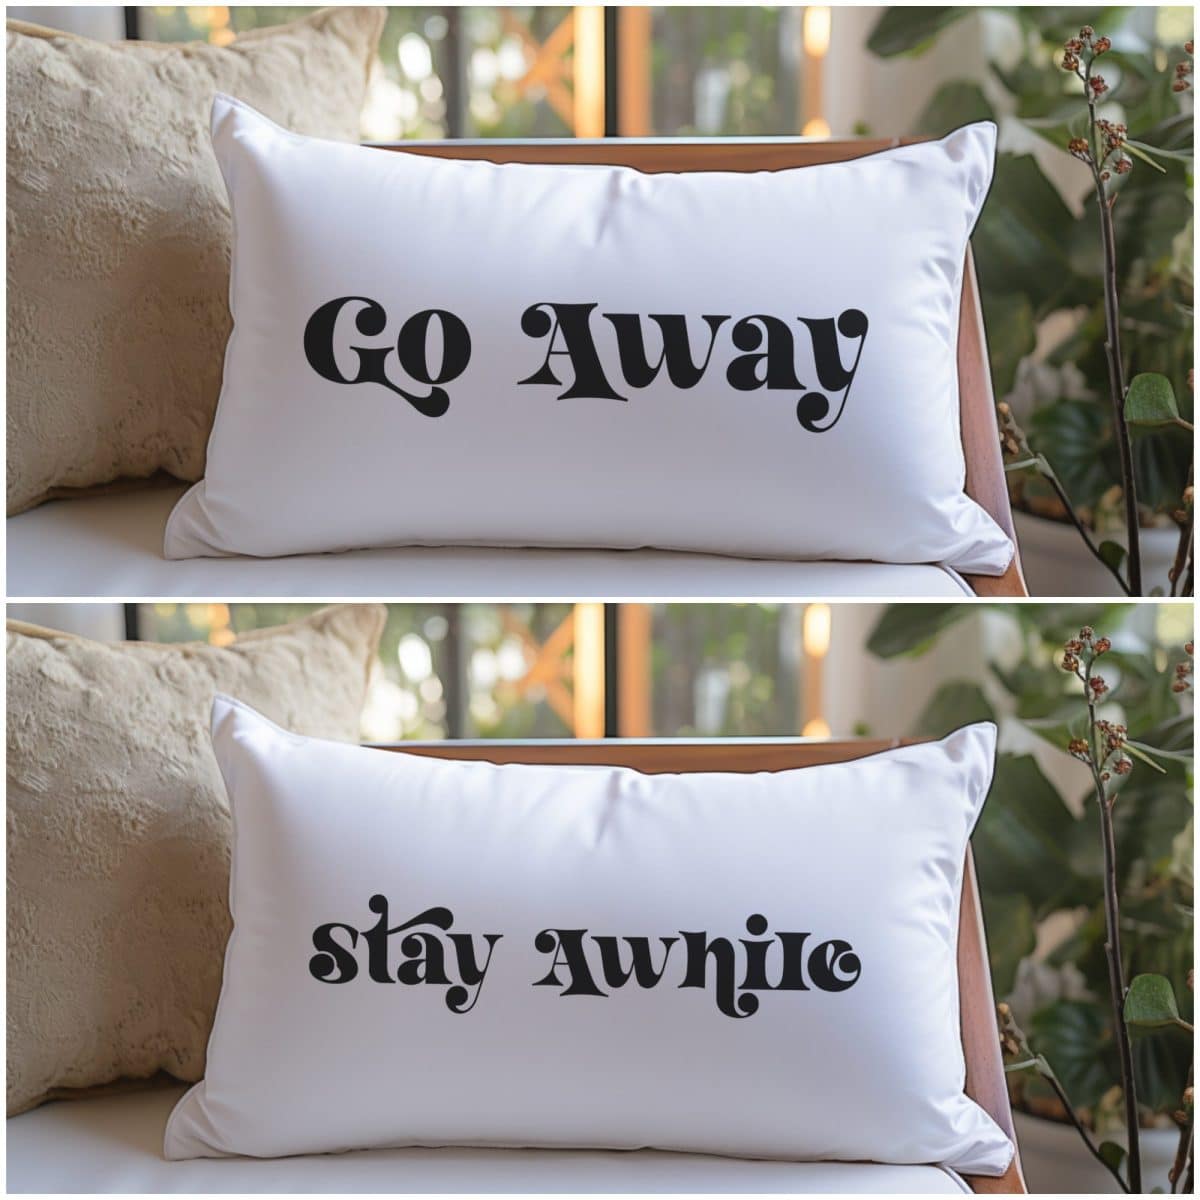 Go Away Stay Awhile Pillows by Mad in Crafts